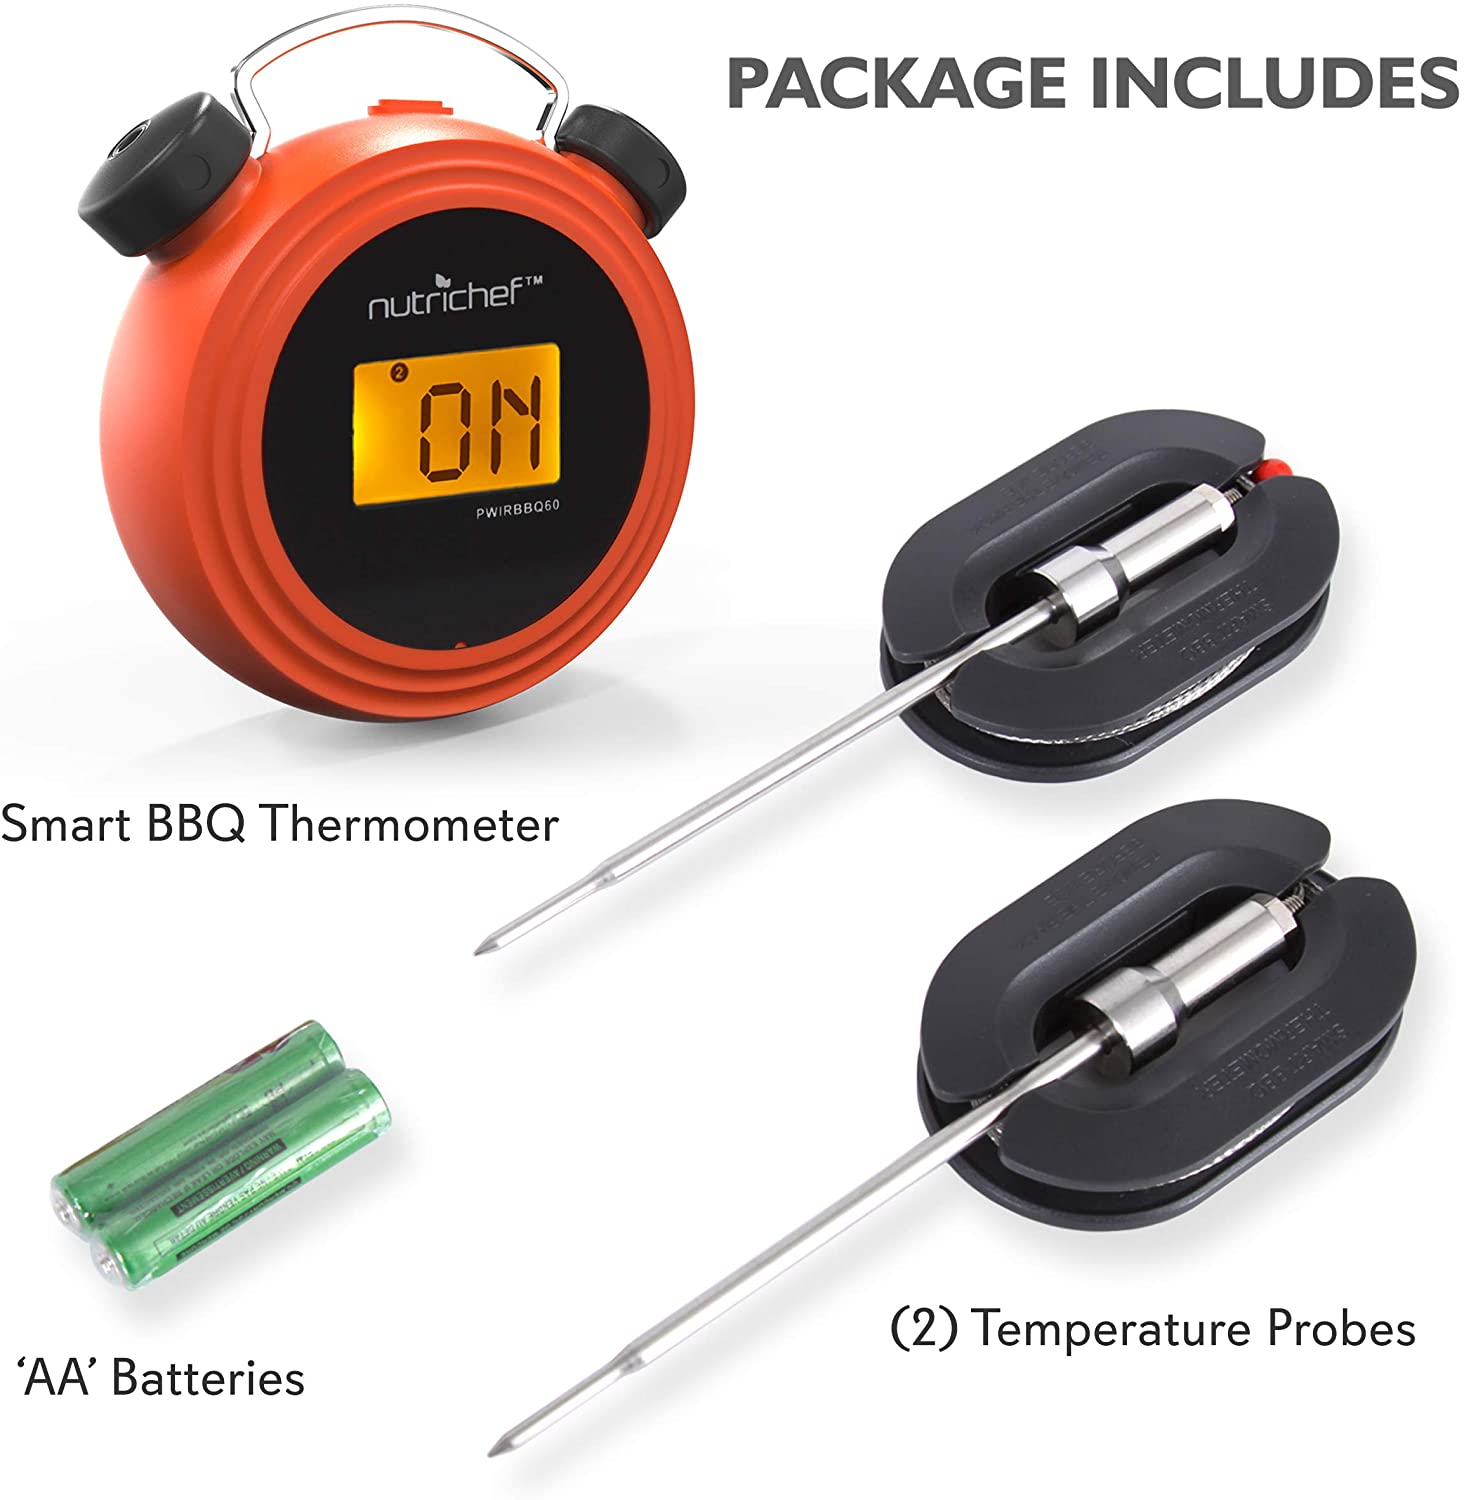 NutriChef Smart Wireless Thermometer package items